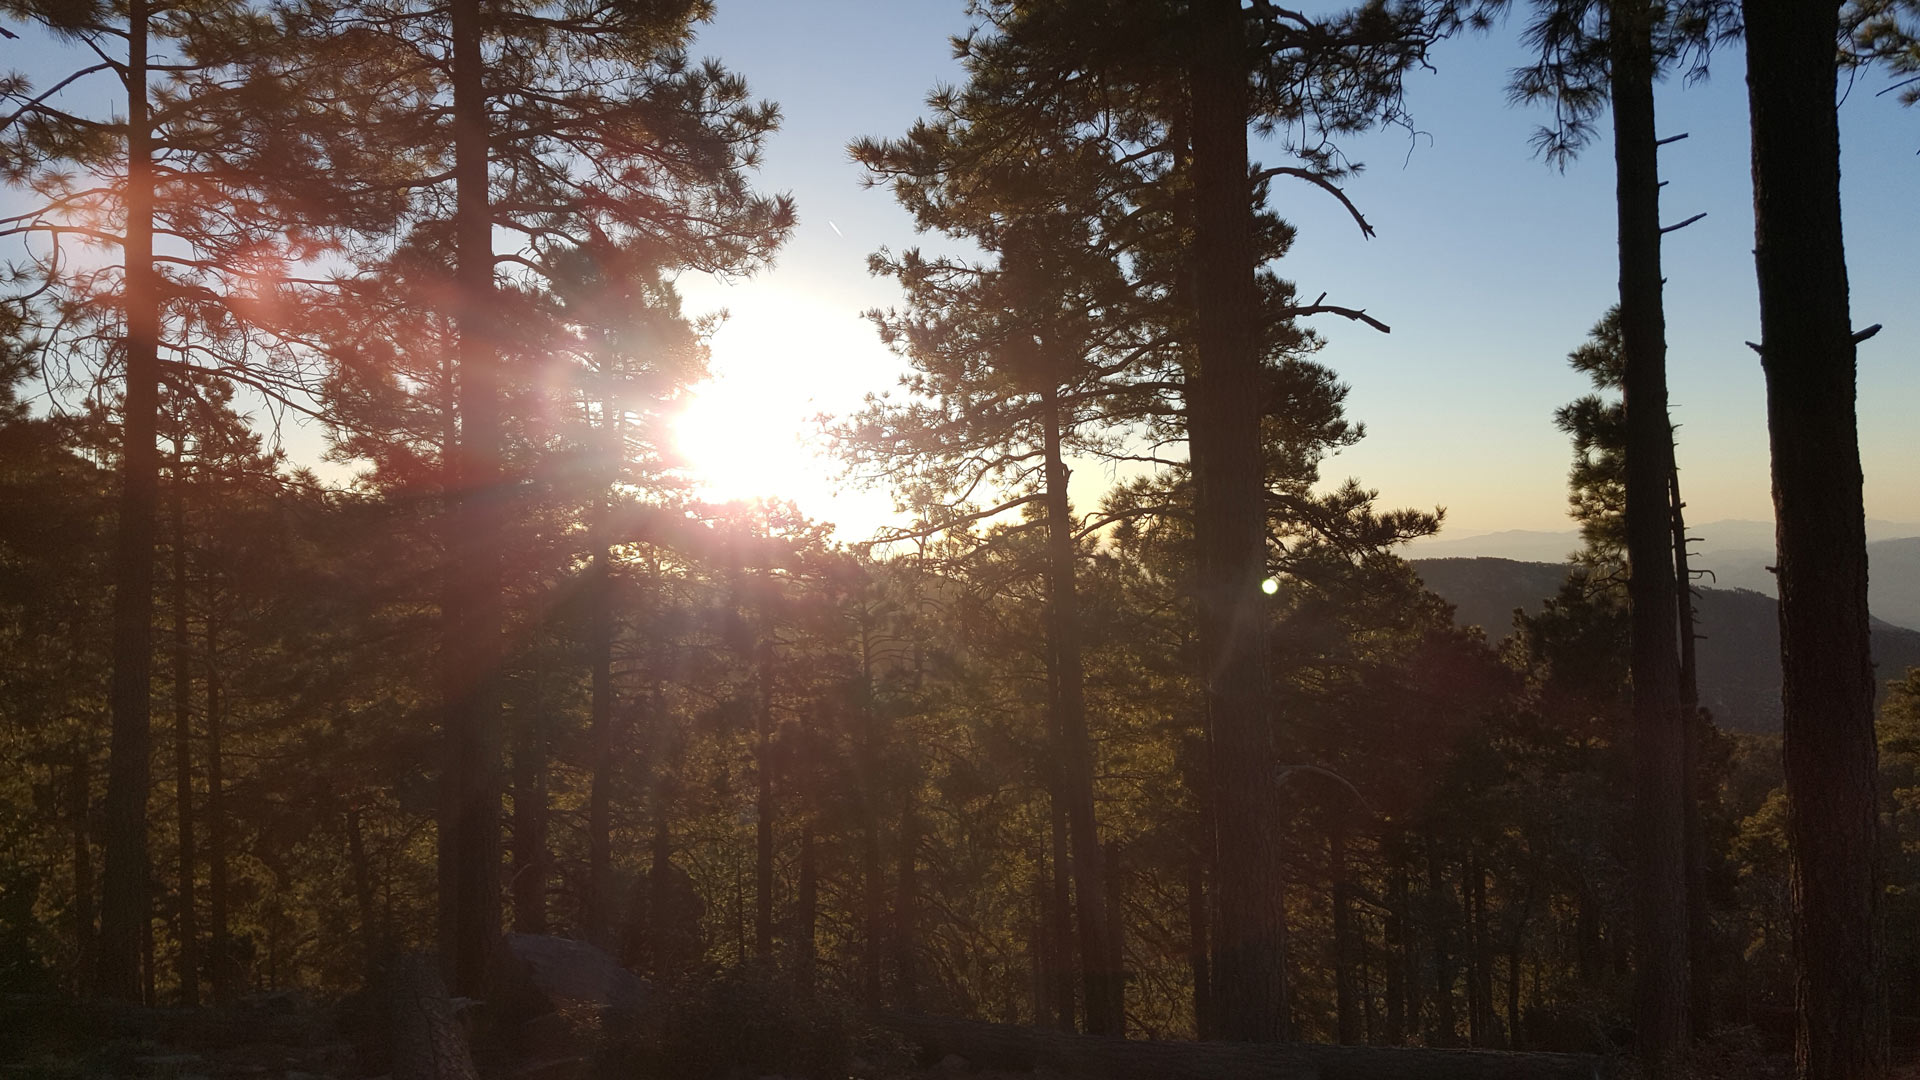 The sun rises through the trees in the Coronado National Forest.